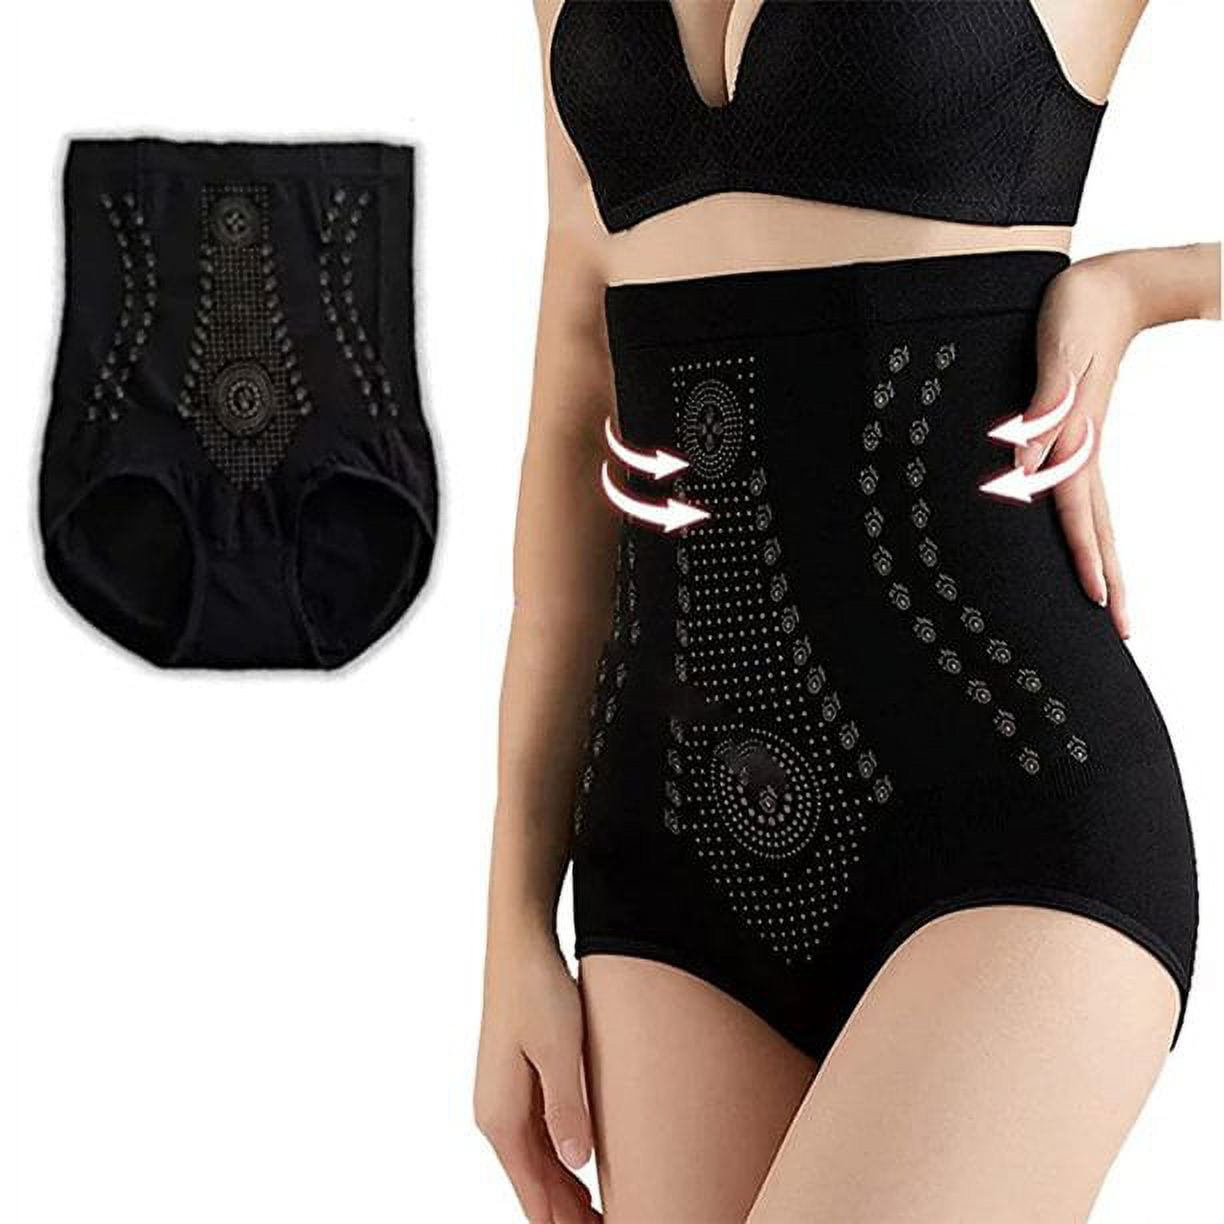 Body Shapers for sale in Baltimore, Maryland